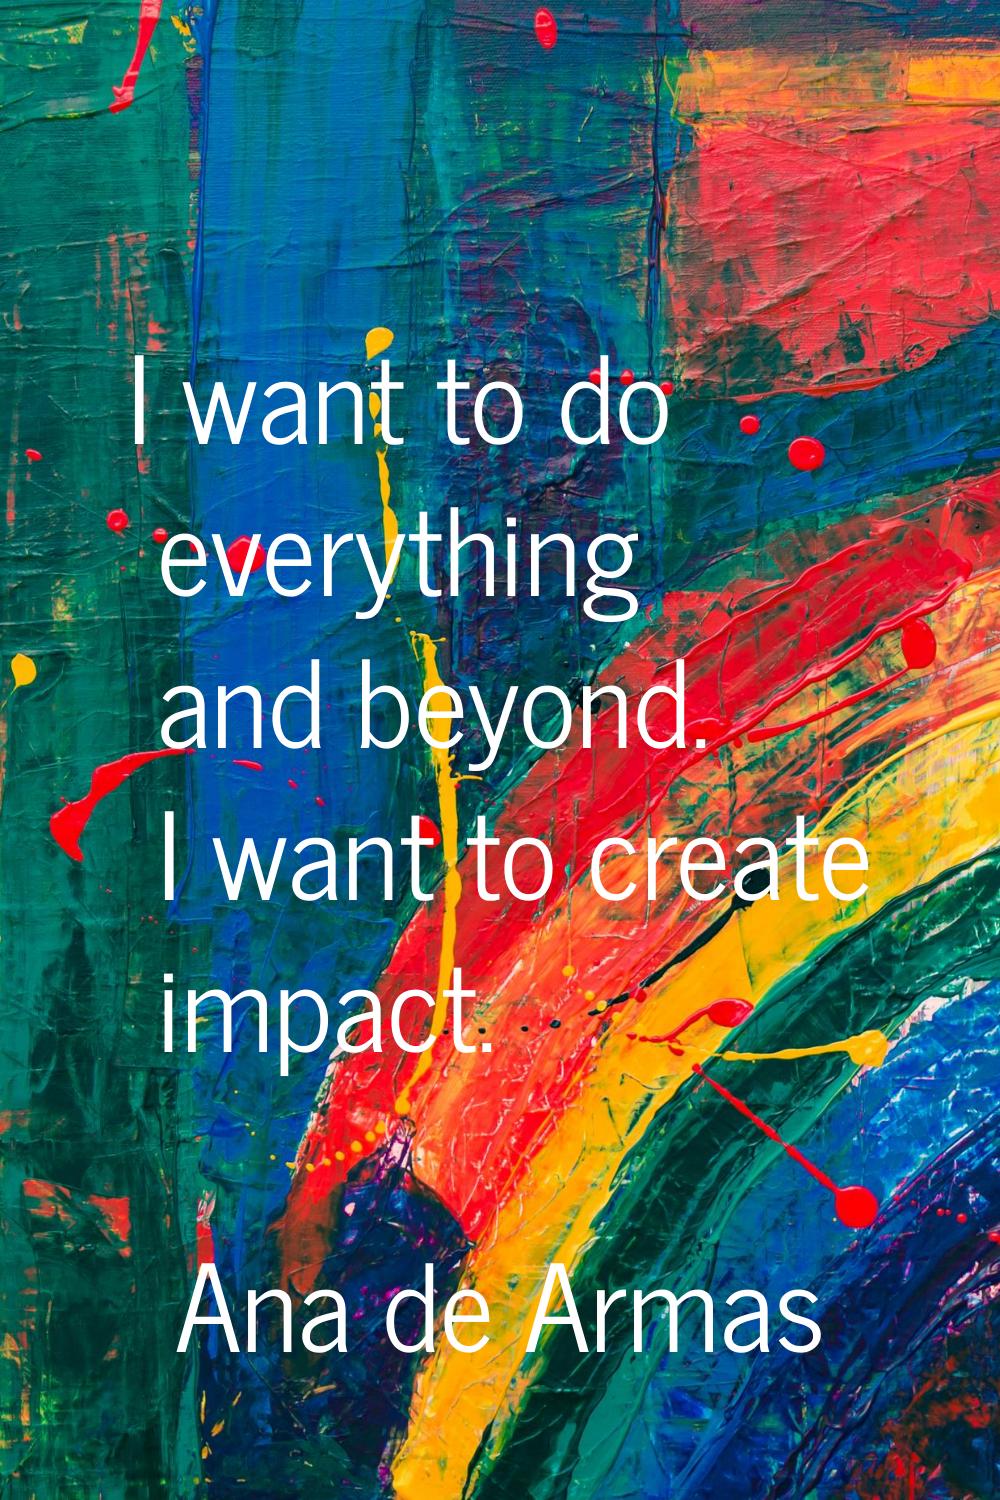 I want to do everything and beyond. I want to create impact.